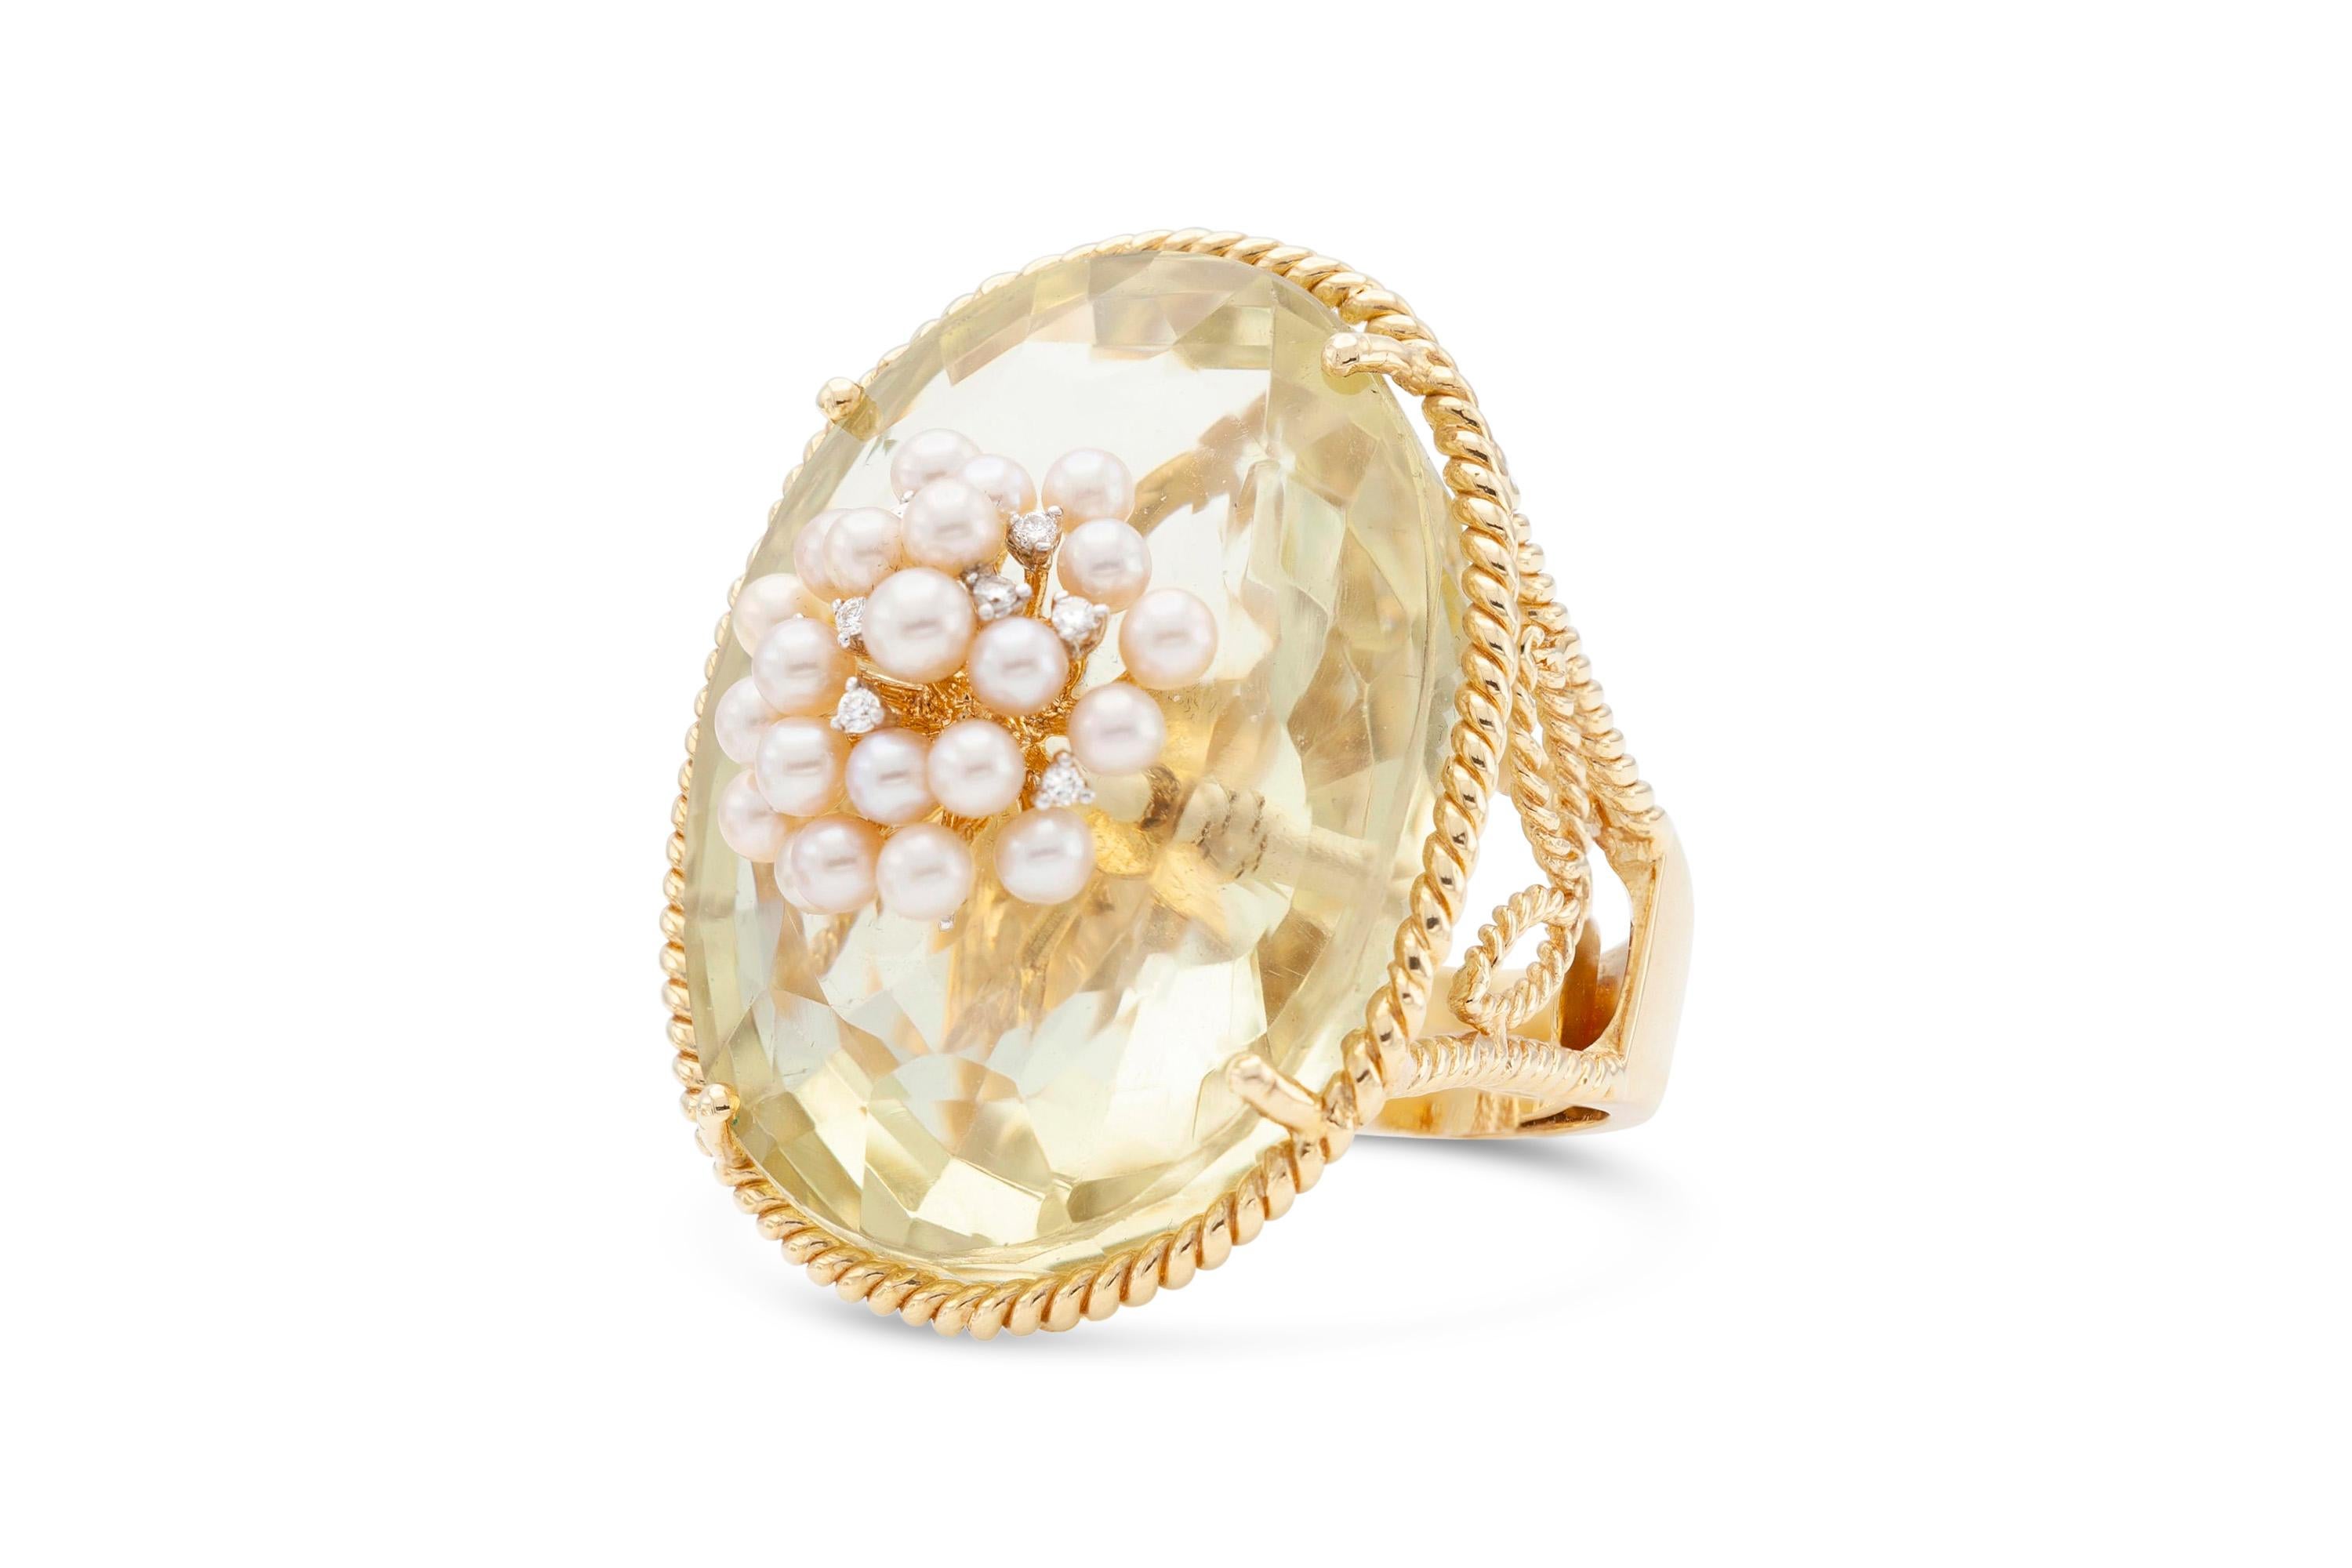 Finely crafted in 18k yellow gold with a 100.00 carat citrine, cultured pearls, and diamonds.